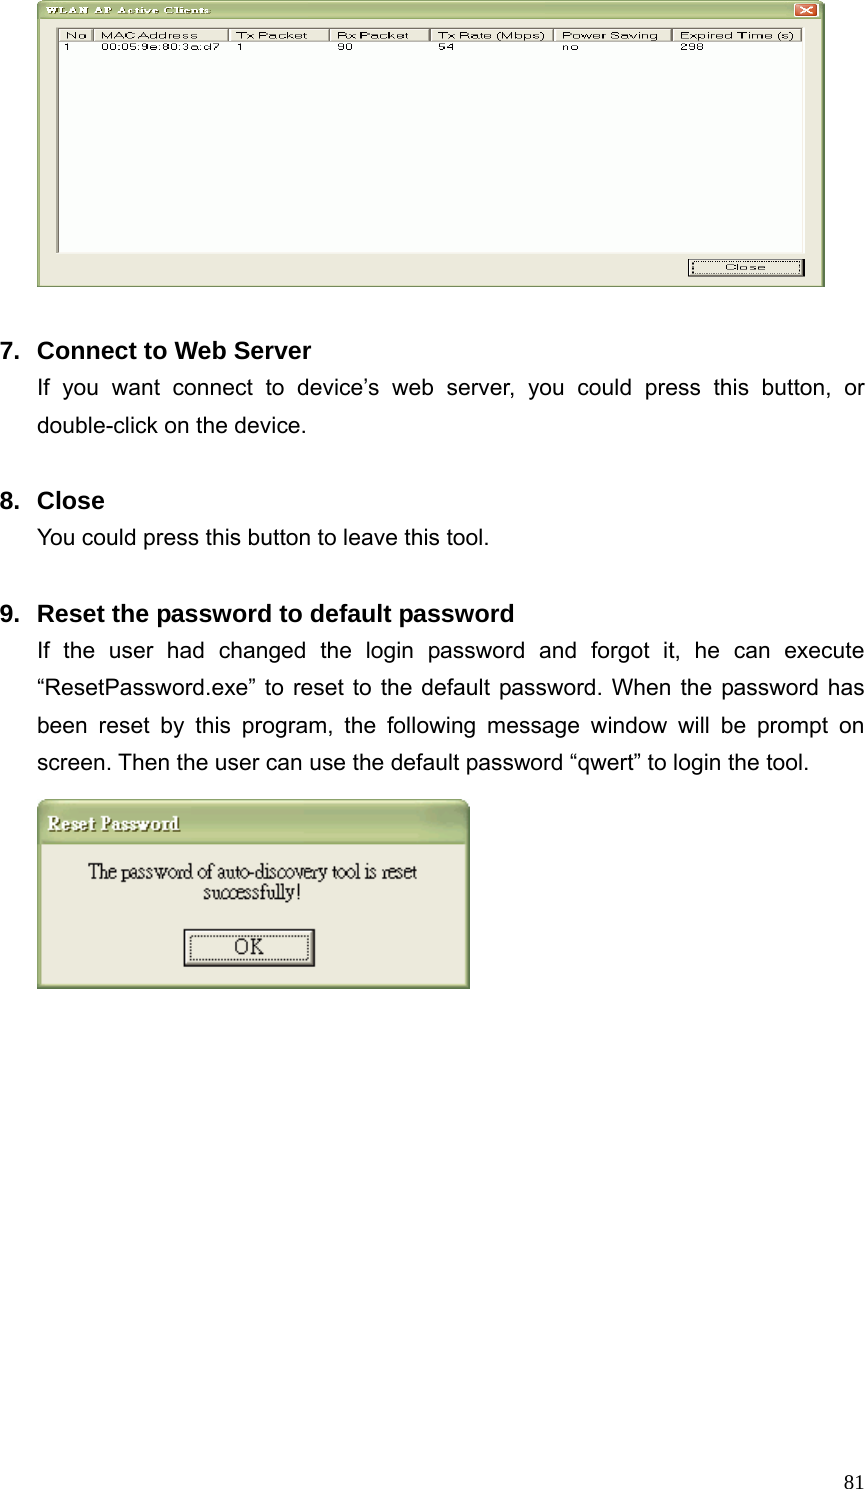  81  7.  Connect to Web Server If you want connect to device’s web server, you could press this button, or double-click on the device.  8. Close You could press this button to leave this tool.  9.  Reset the password to default password If the user had changed the login password and forgot it, he can execute “ResetPassword.exe” to reset to the default password. When the password has been reset by this program, the following message window will be prompt on screen. Then the user can use the default password “qwert” to login the tool.  